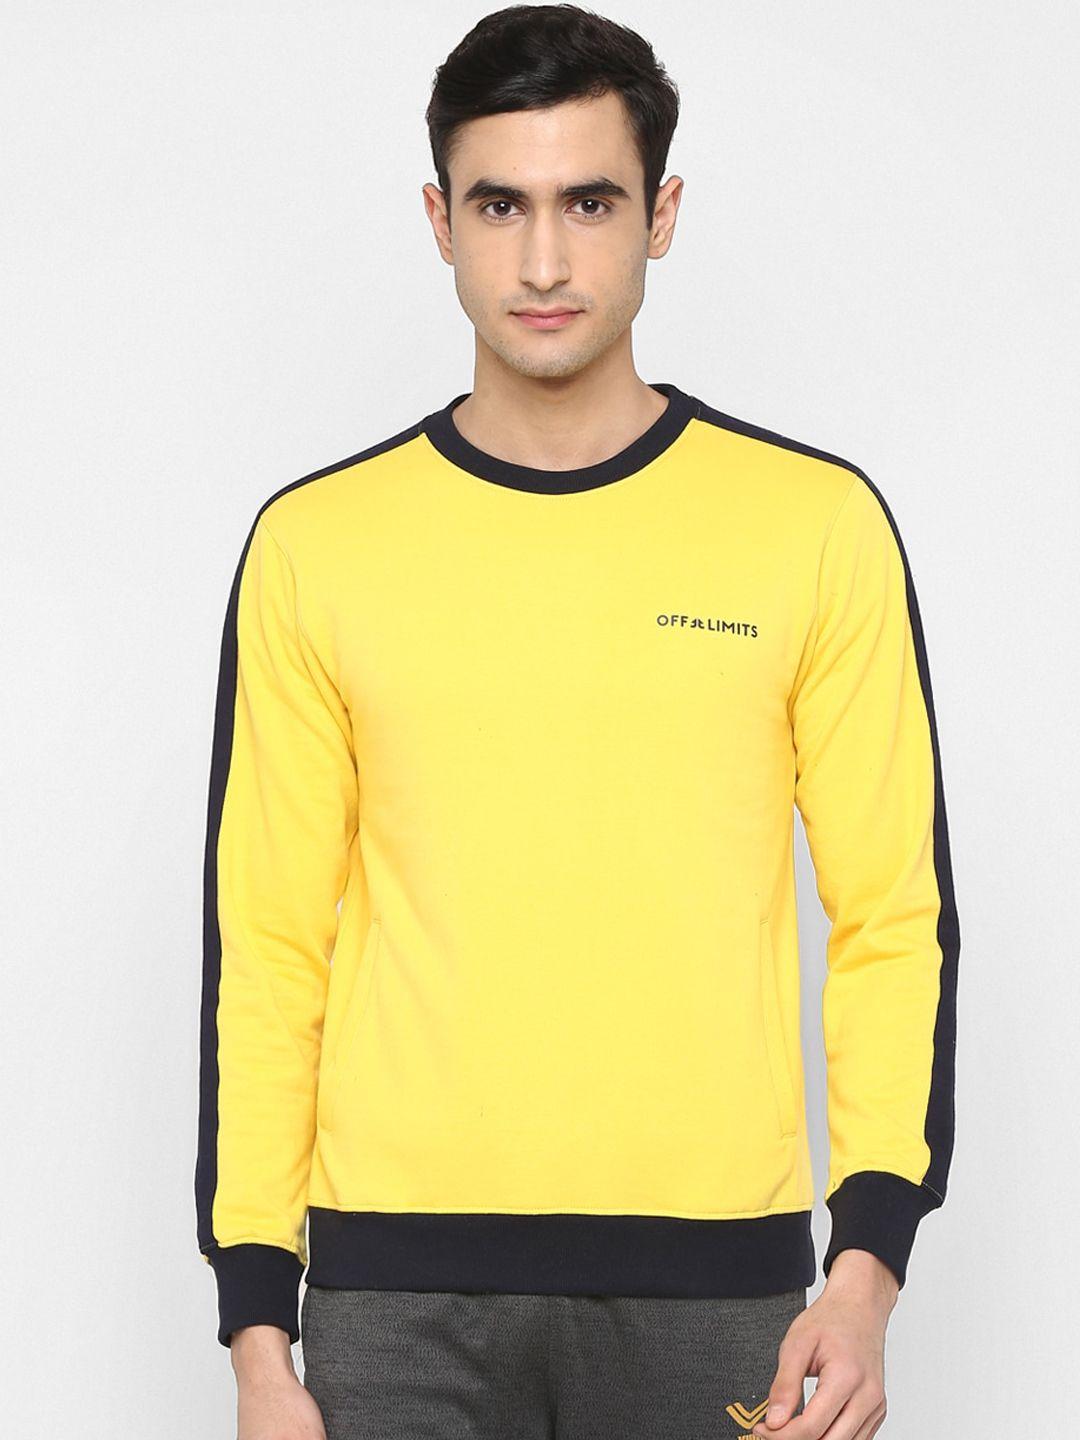 off limits men yellow and black solid pullover sweatshirt